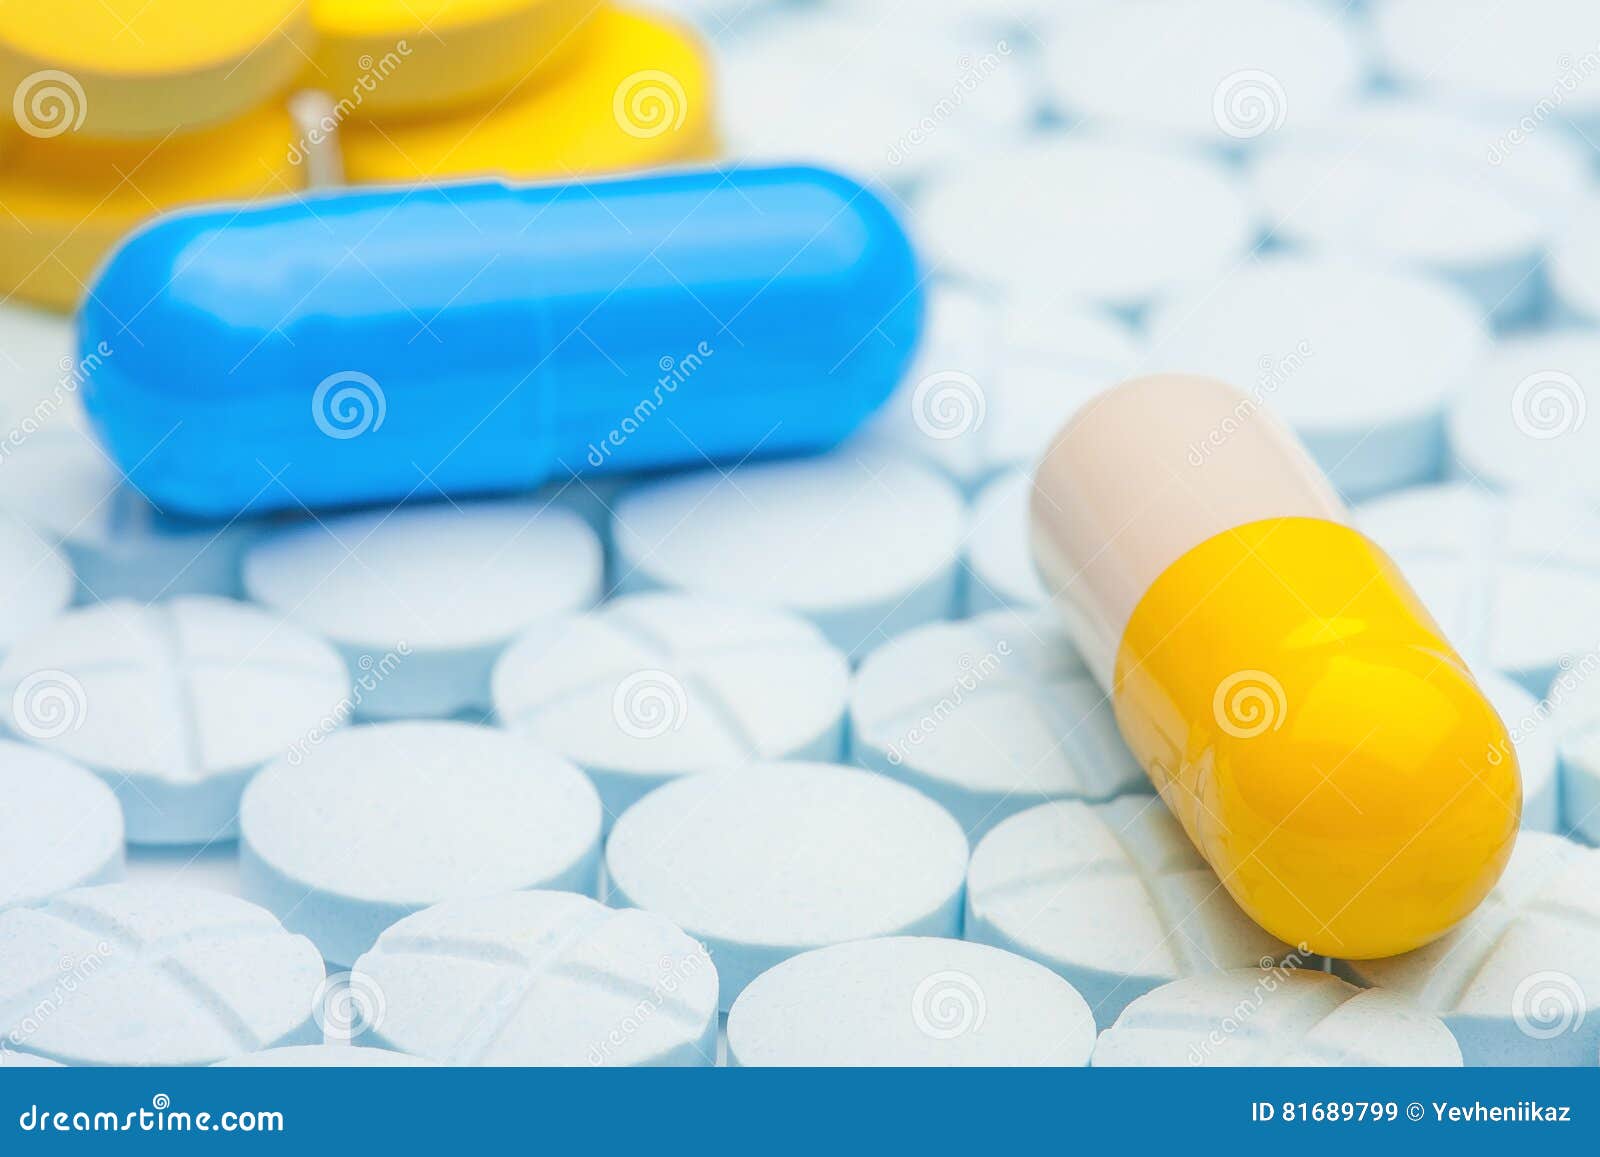 Blue And Yellow Pill On Blue Medical Tablets Stock Image Image of herbal, depressant 81689799